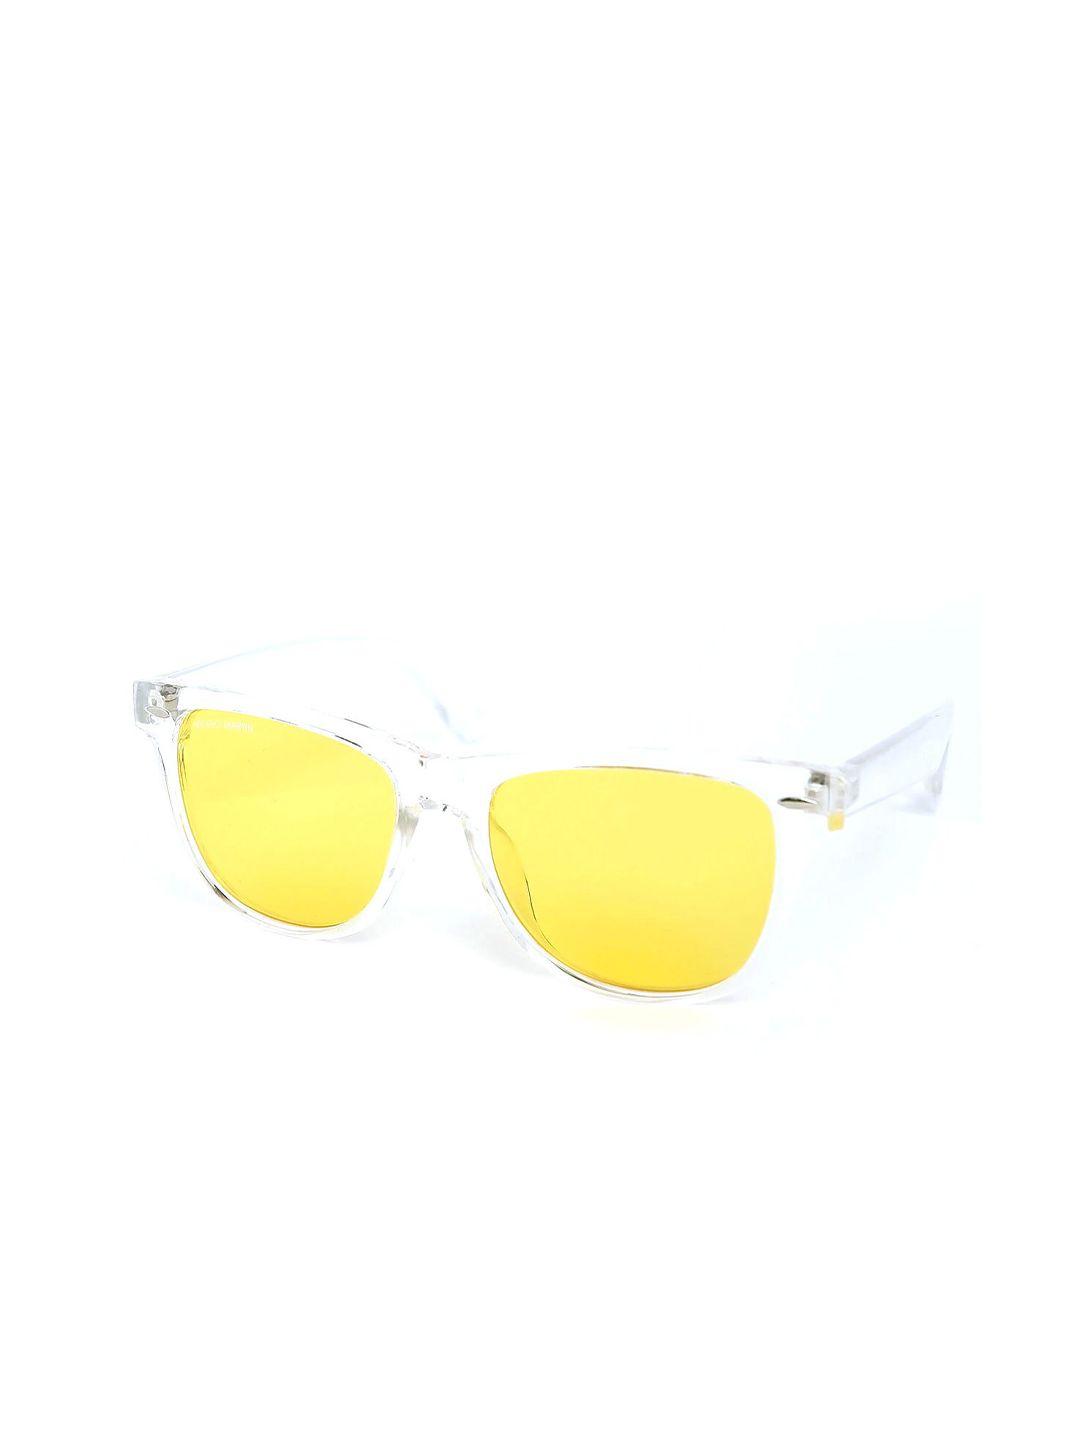 micelo martin unisex yellow lens & white sunglasses with uv protected lens mm2001 c6